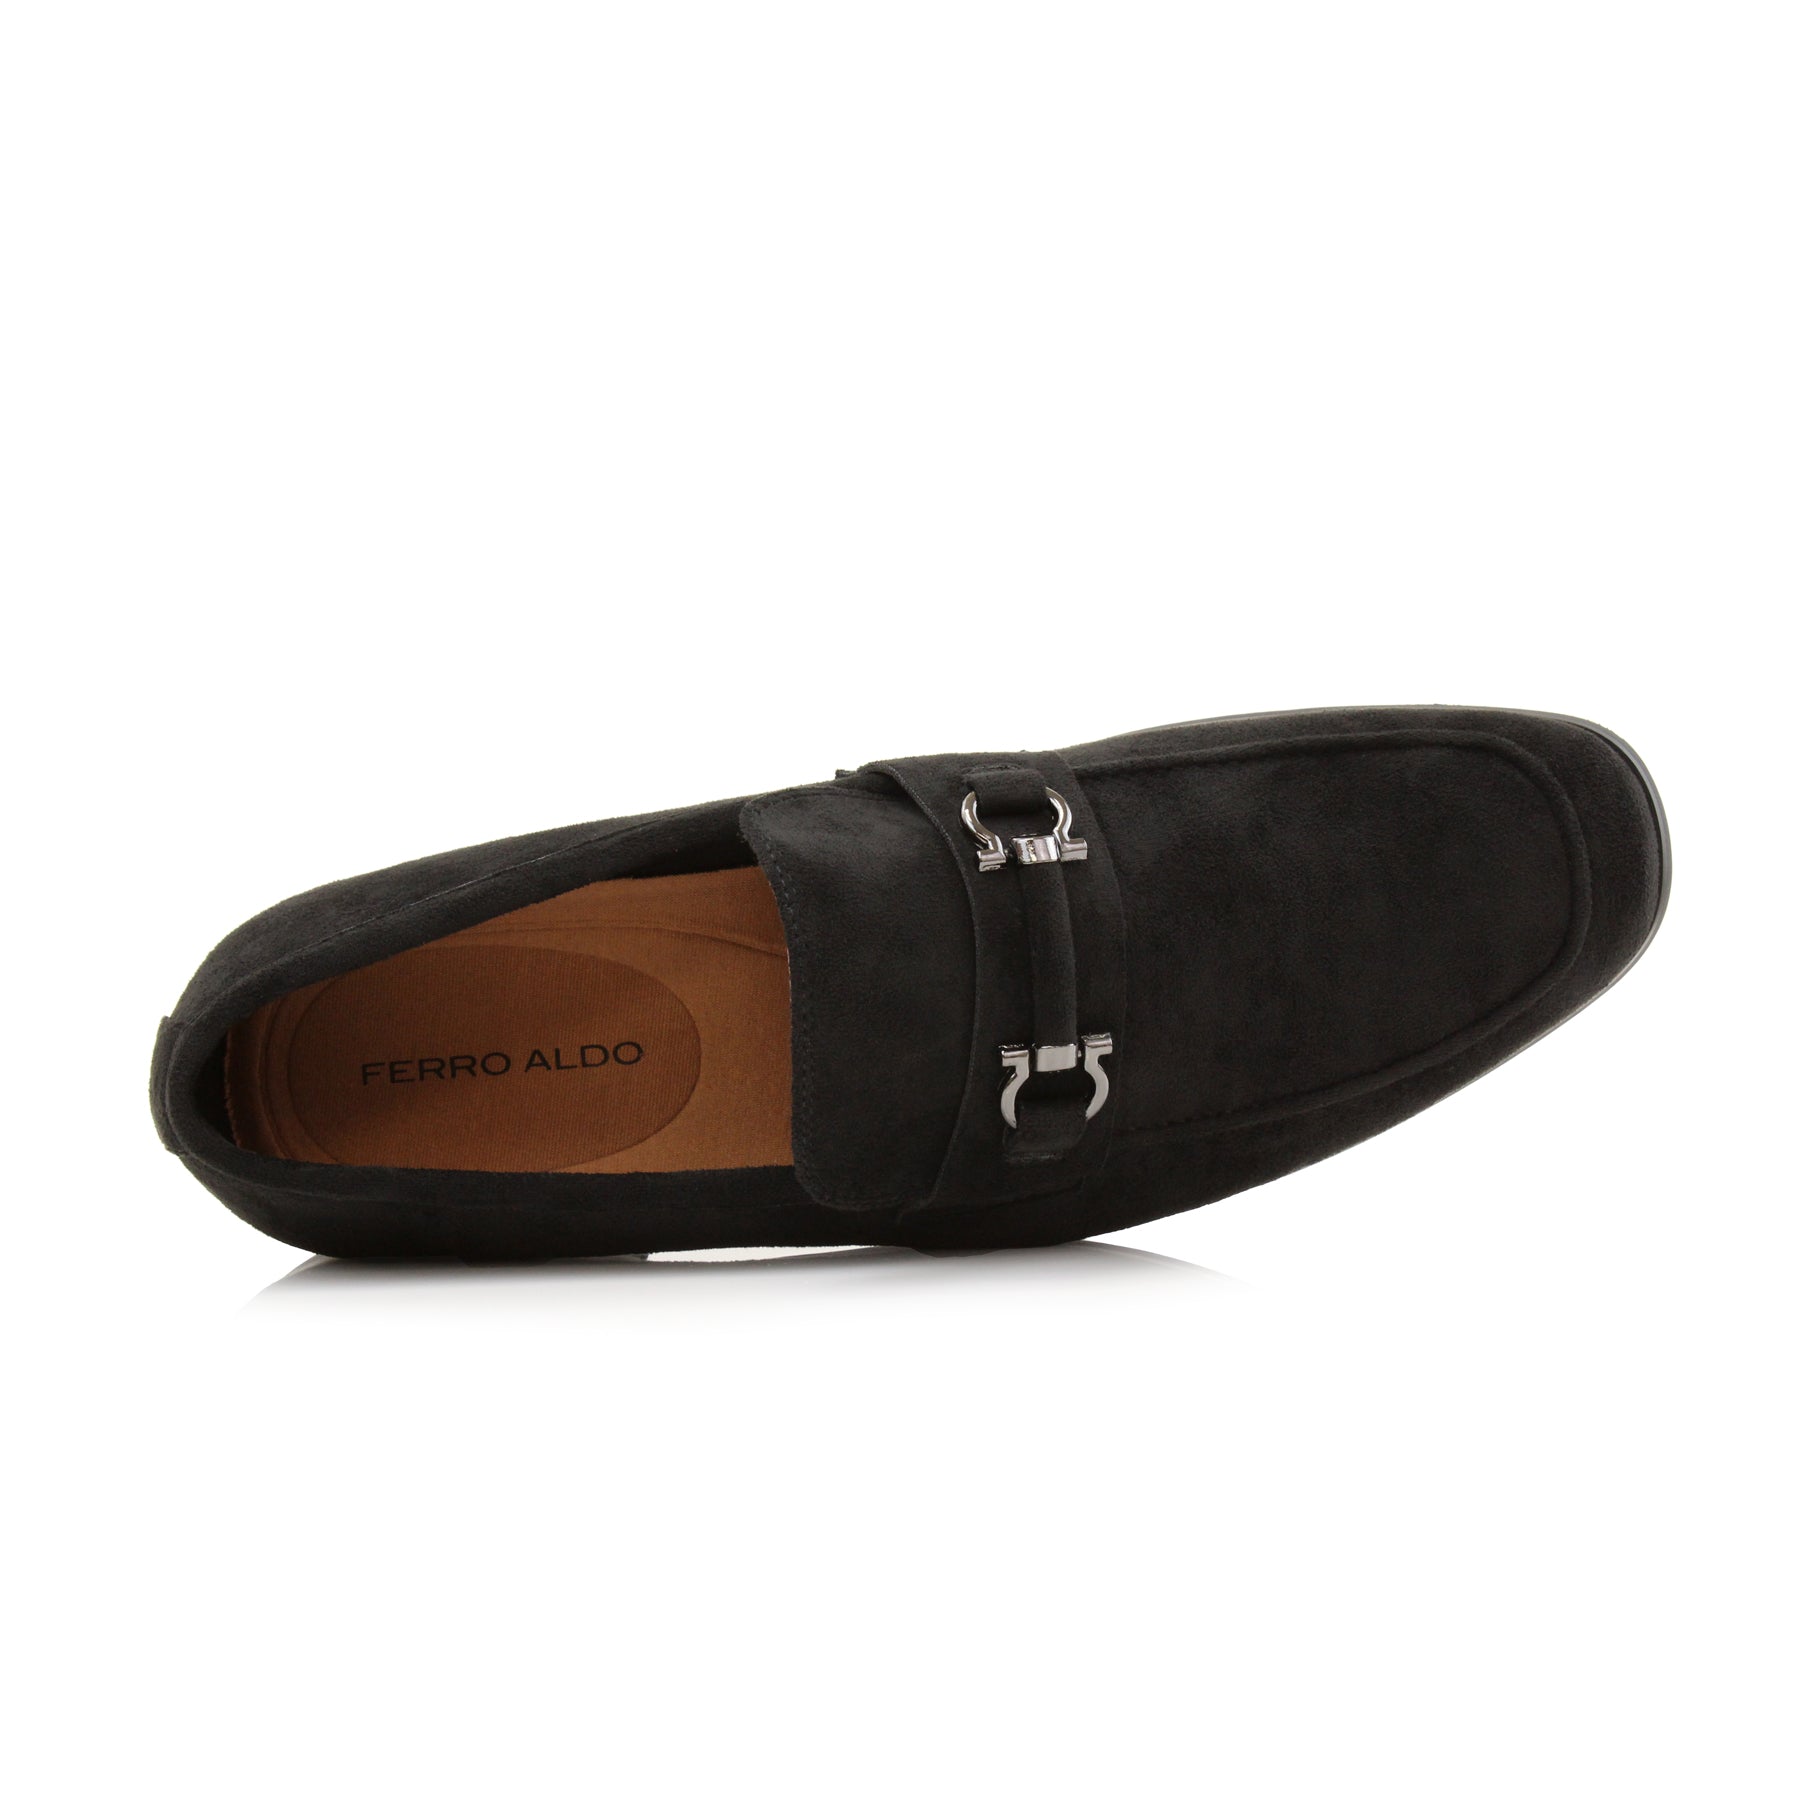 Metal Buckle Suede Loafers | Demitri by Ferro Aldo | Conal Footwear | Top-Down Angle View